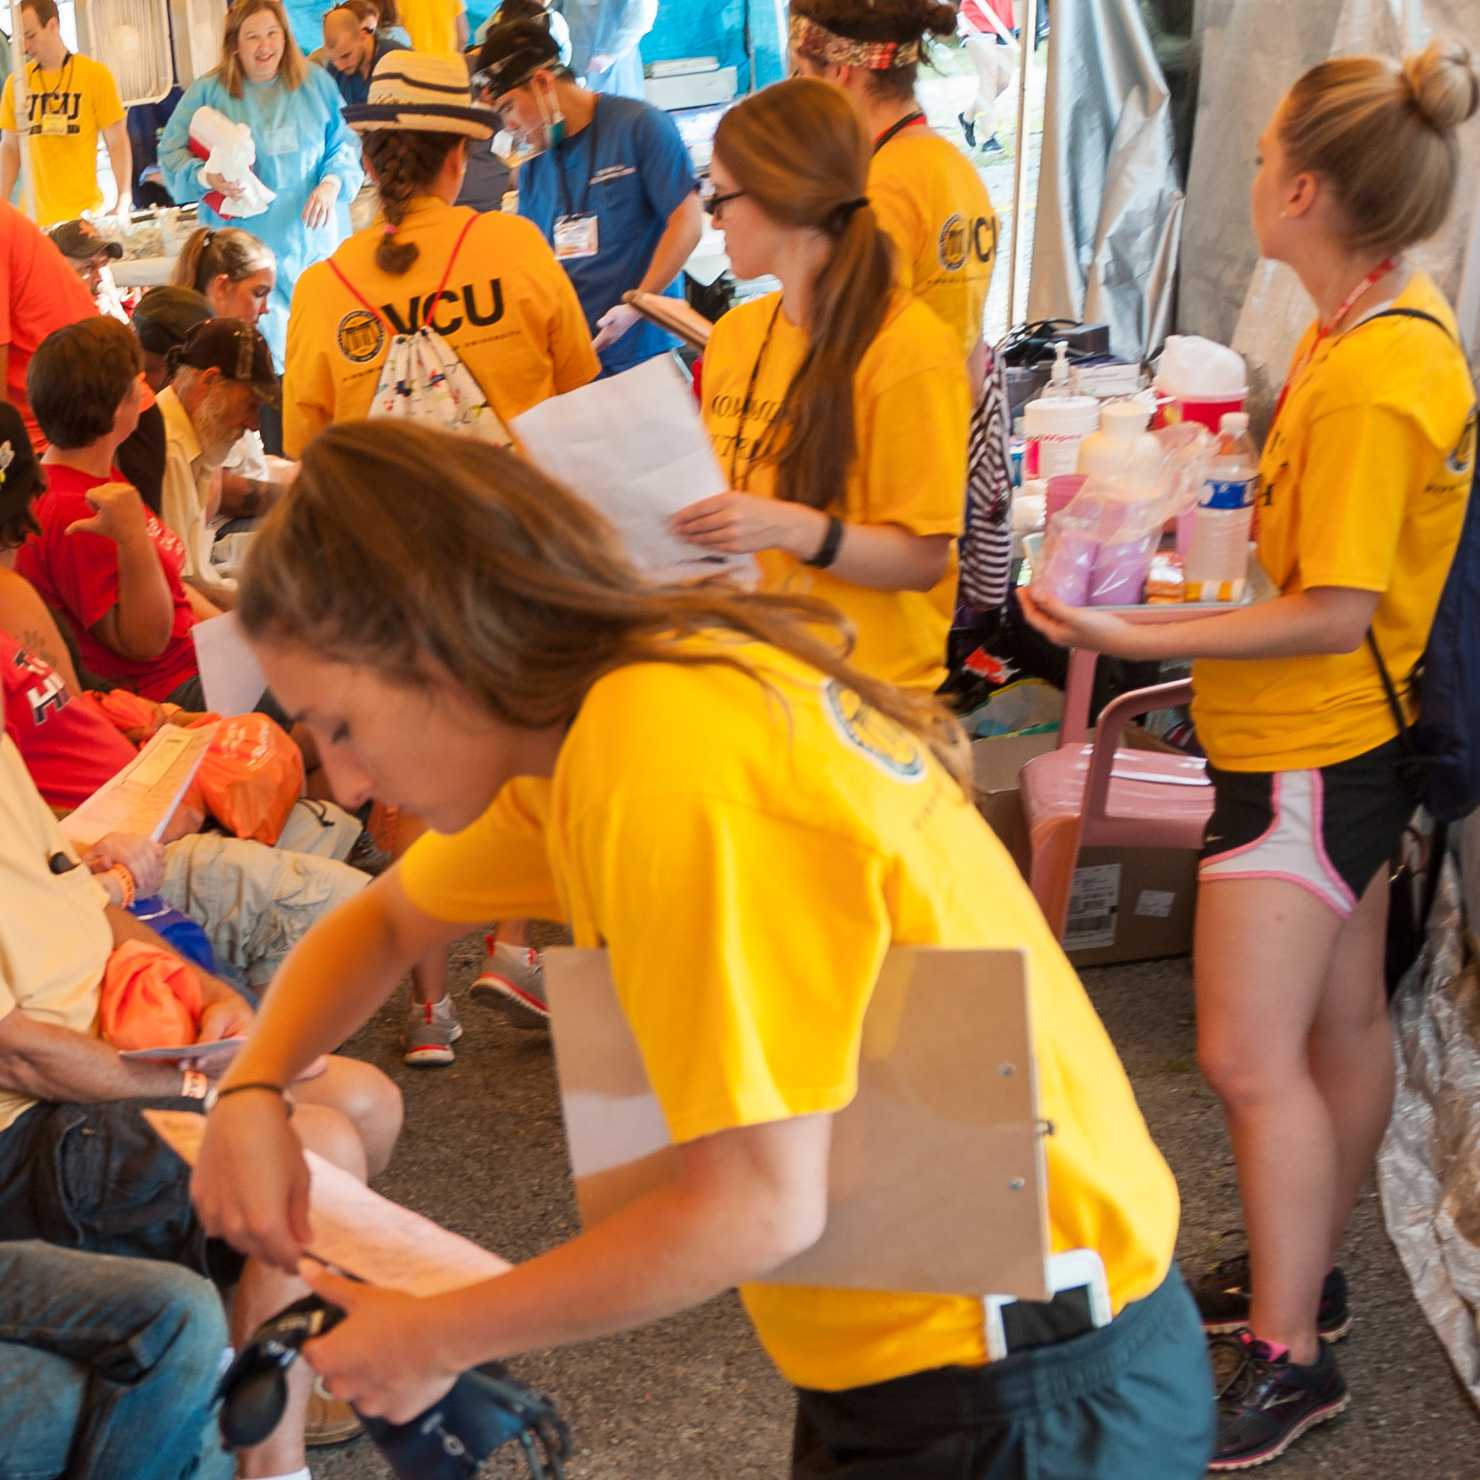 Students work with patients at a pop-up clinic in Wise County, Virginia.